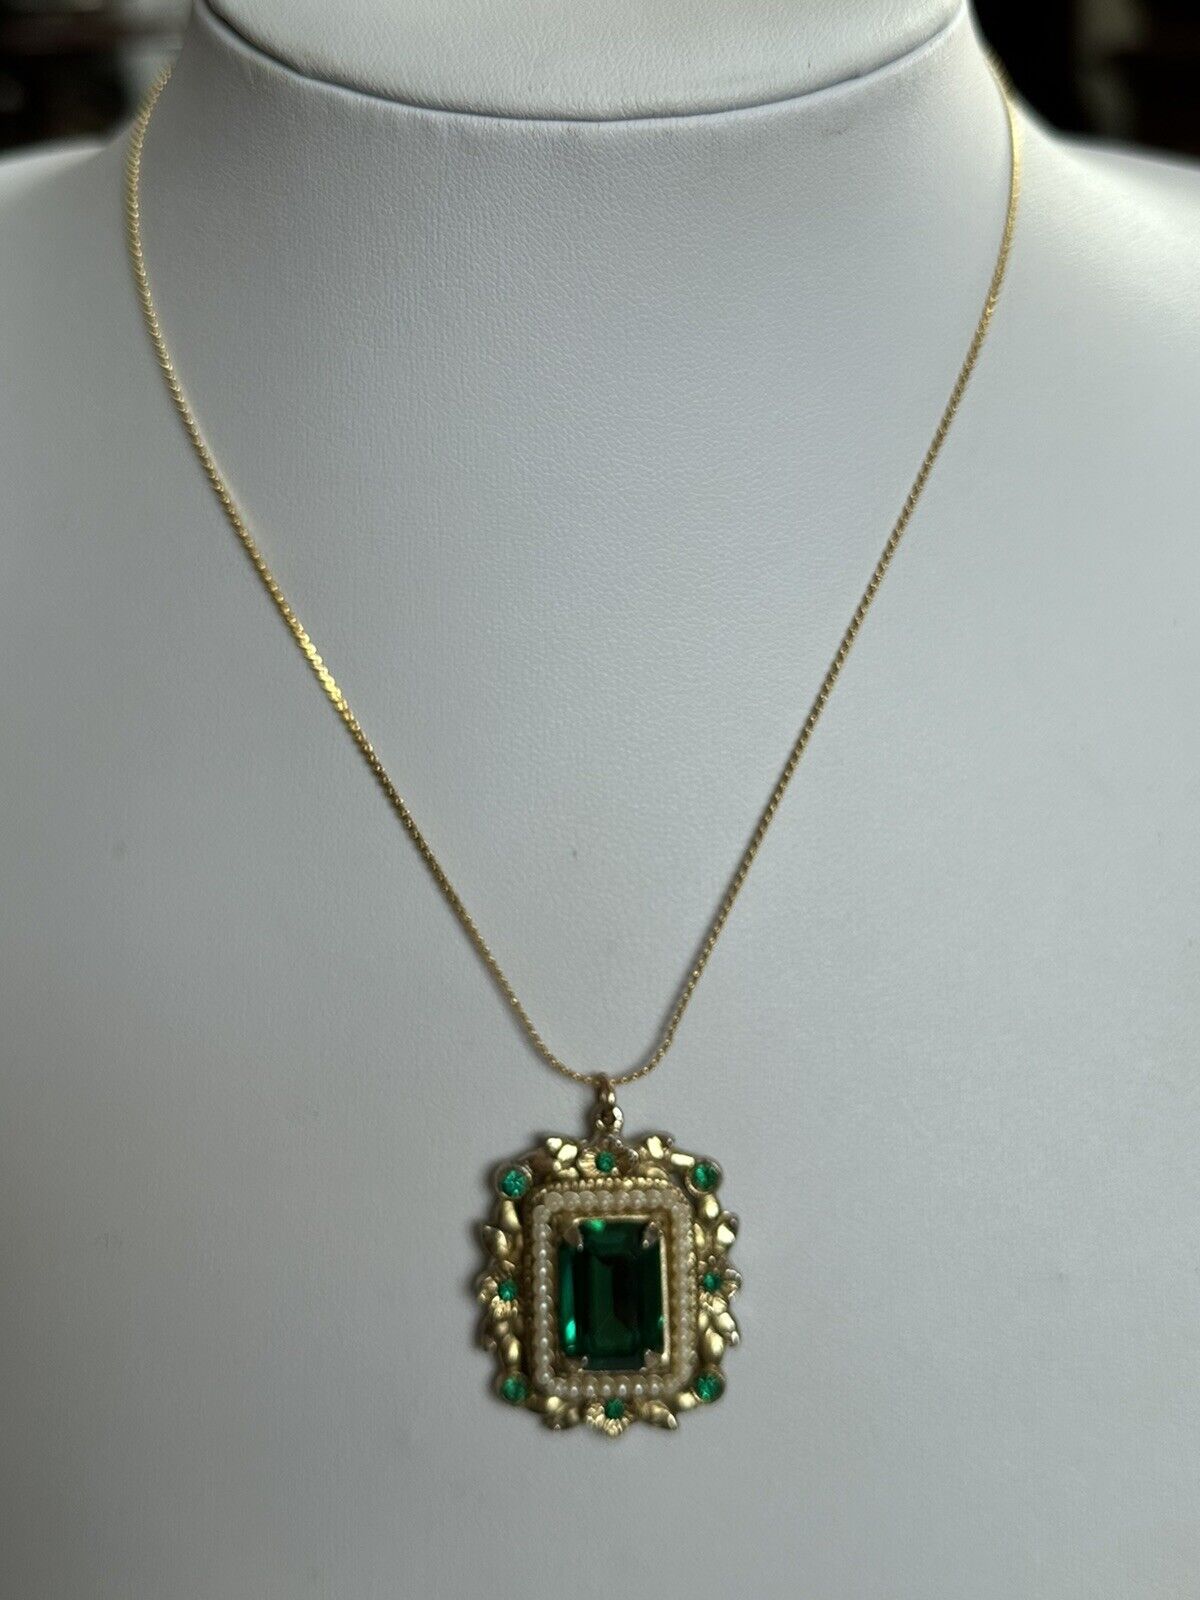 Vintage Coro Signed Green Stone Faux Pearl Pendant Necklace